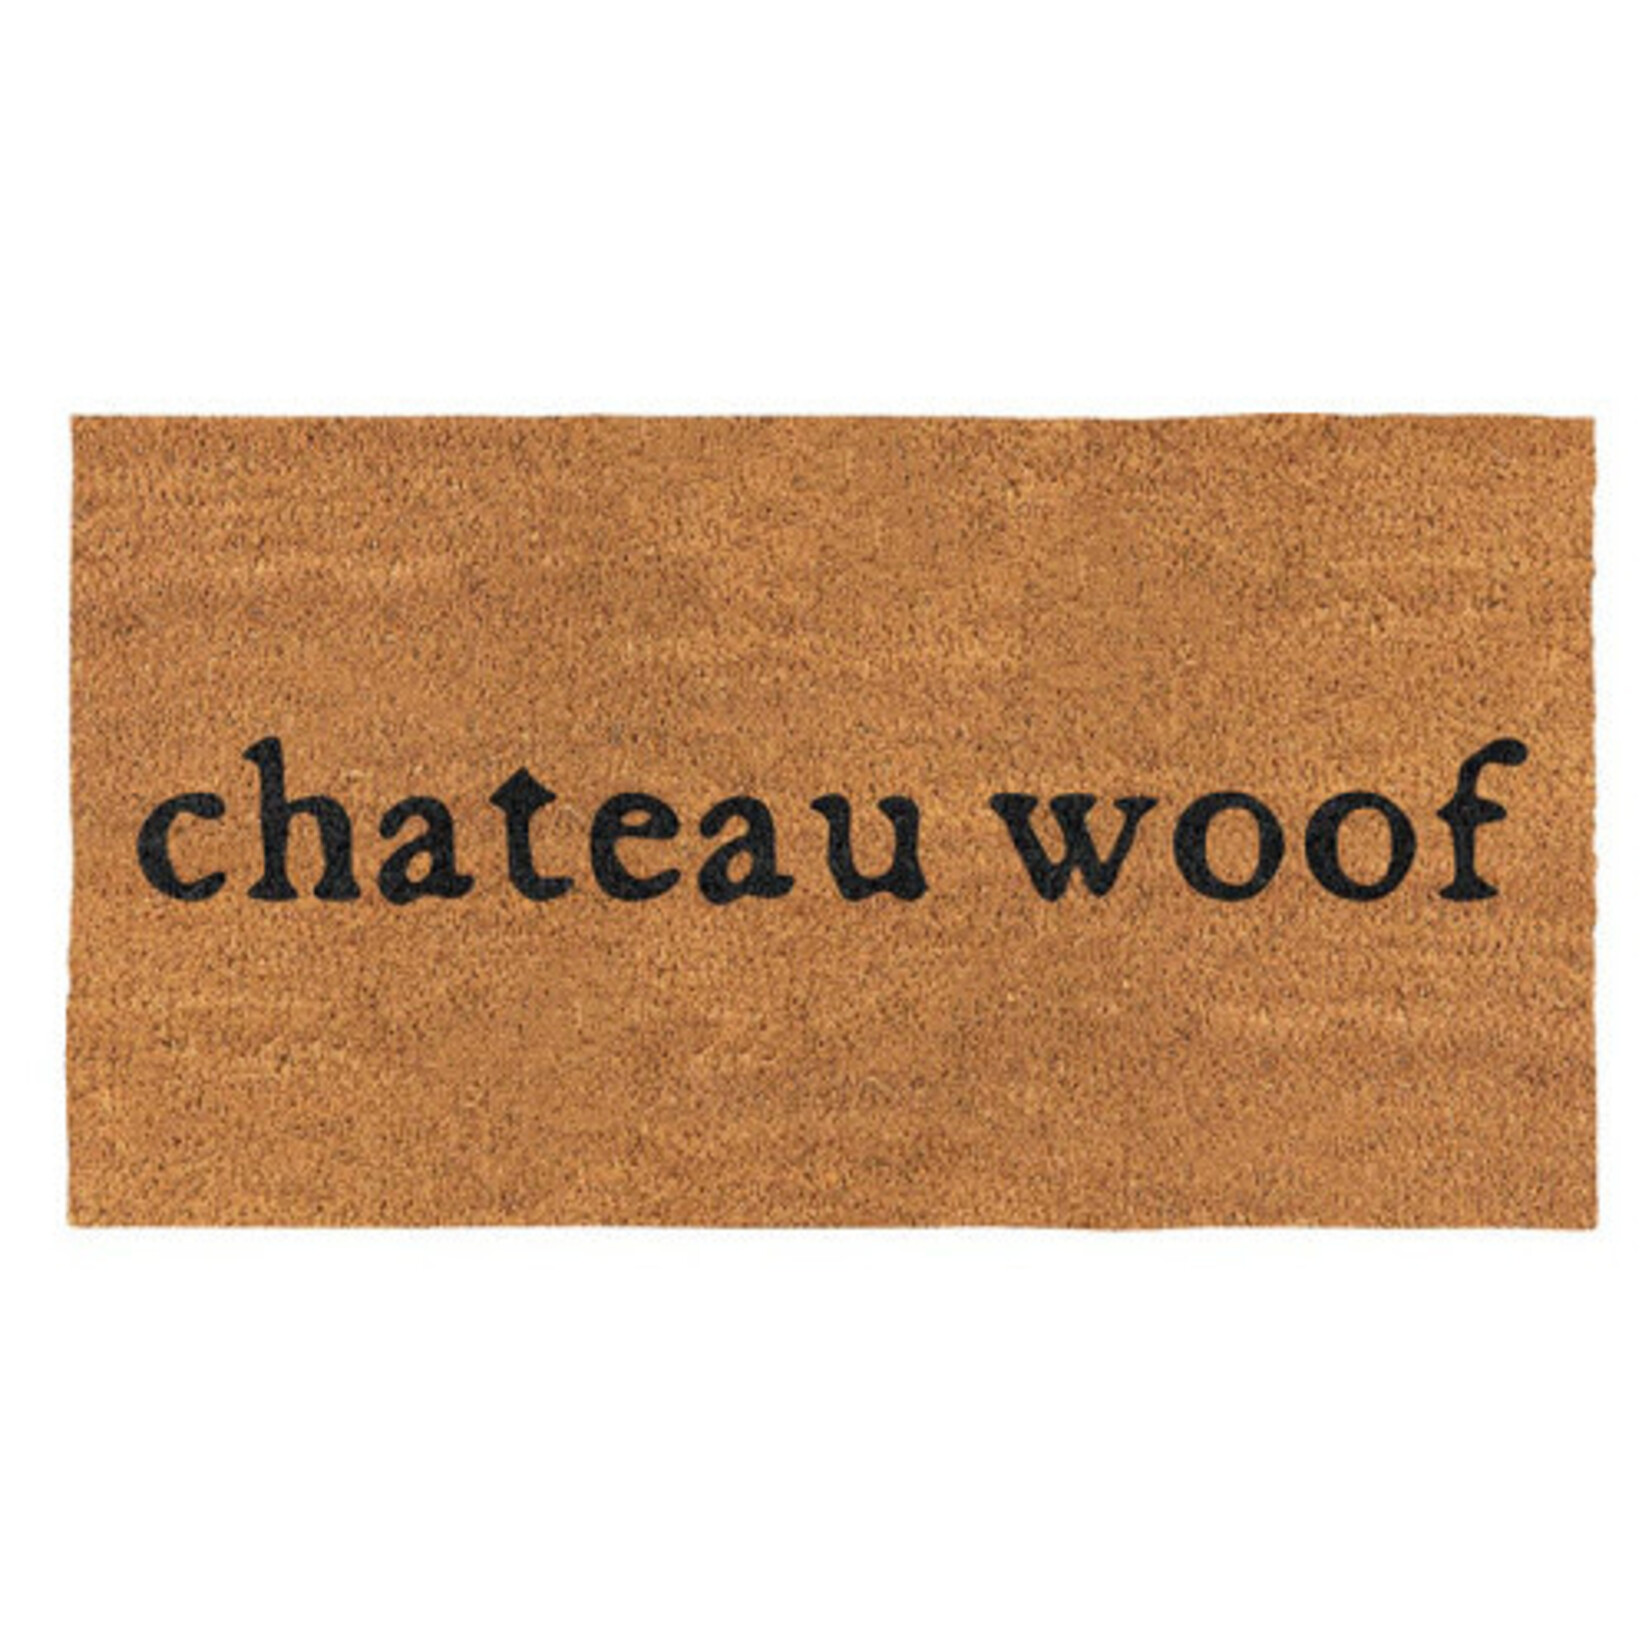 Creative Brands Chateau Woof Large Doormat